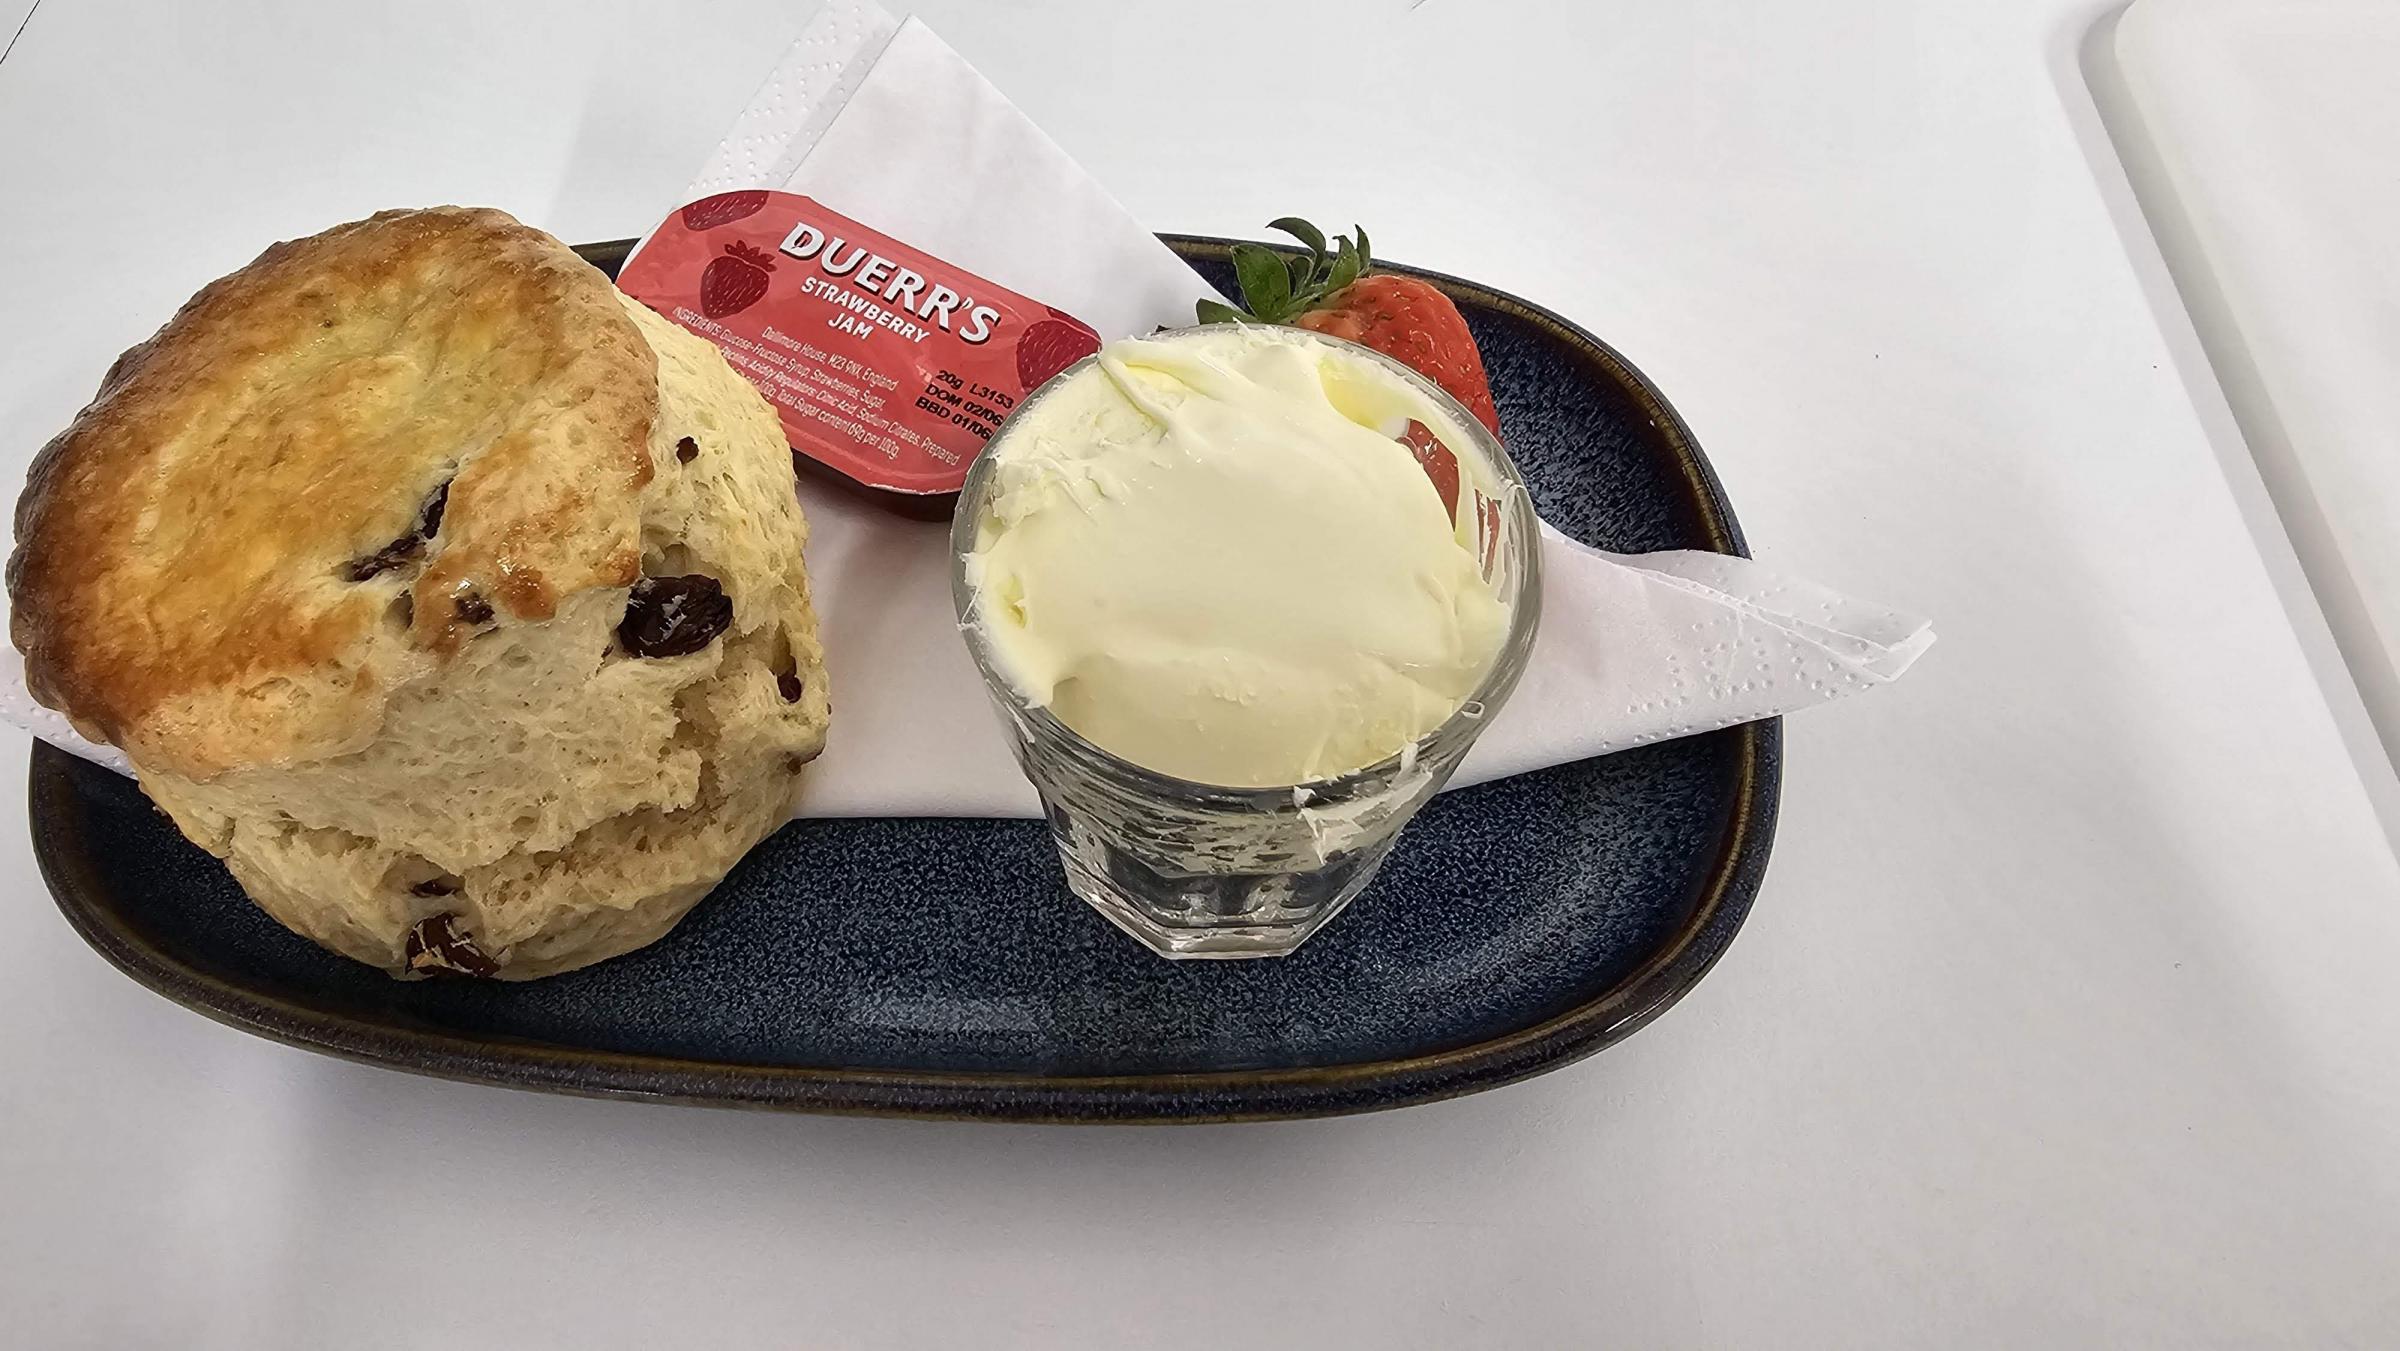 Homemade fruit scones with clotted cream